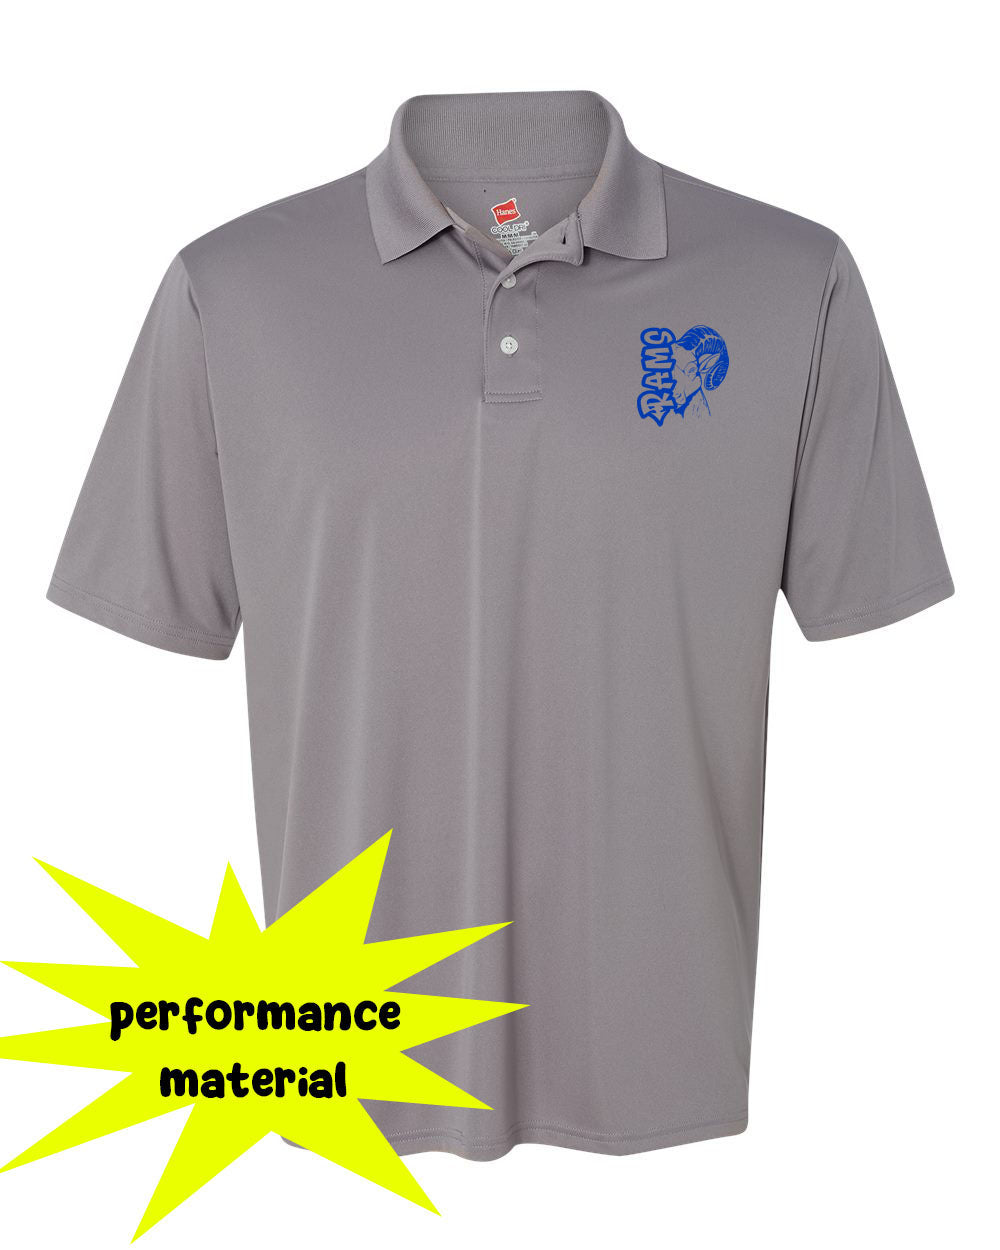 Sussex Middle Design 7 Performance Material Polo T-Shirt